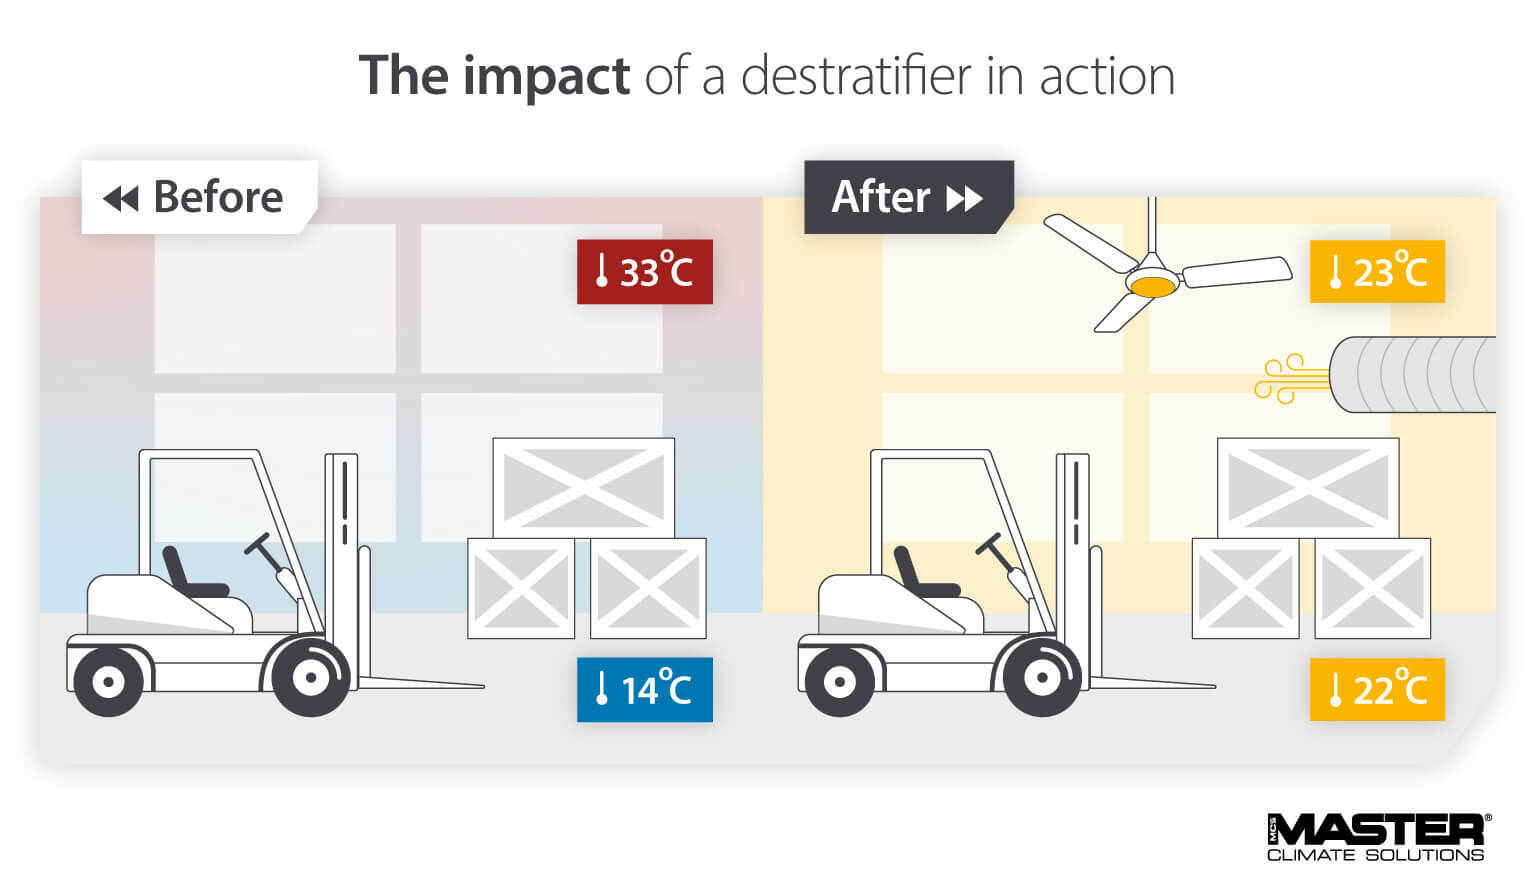 Using a destratifier to distribute warm air from high ceilings - Master infographic image